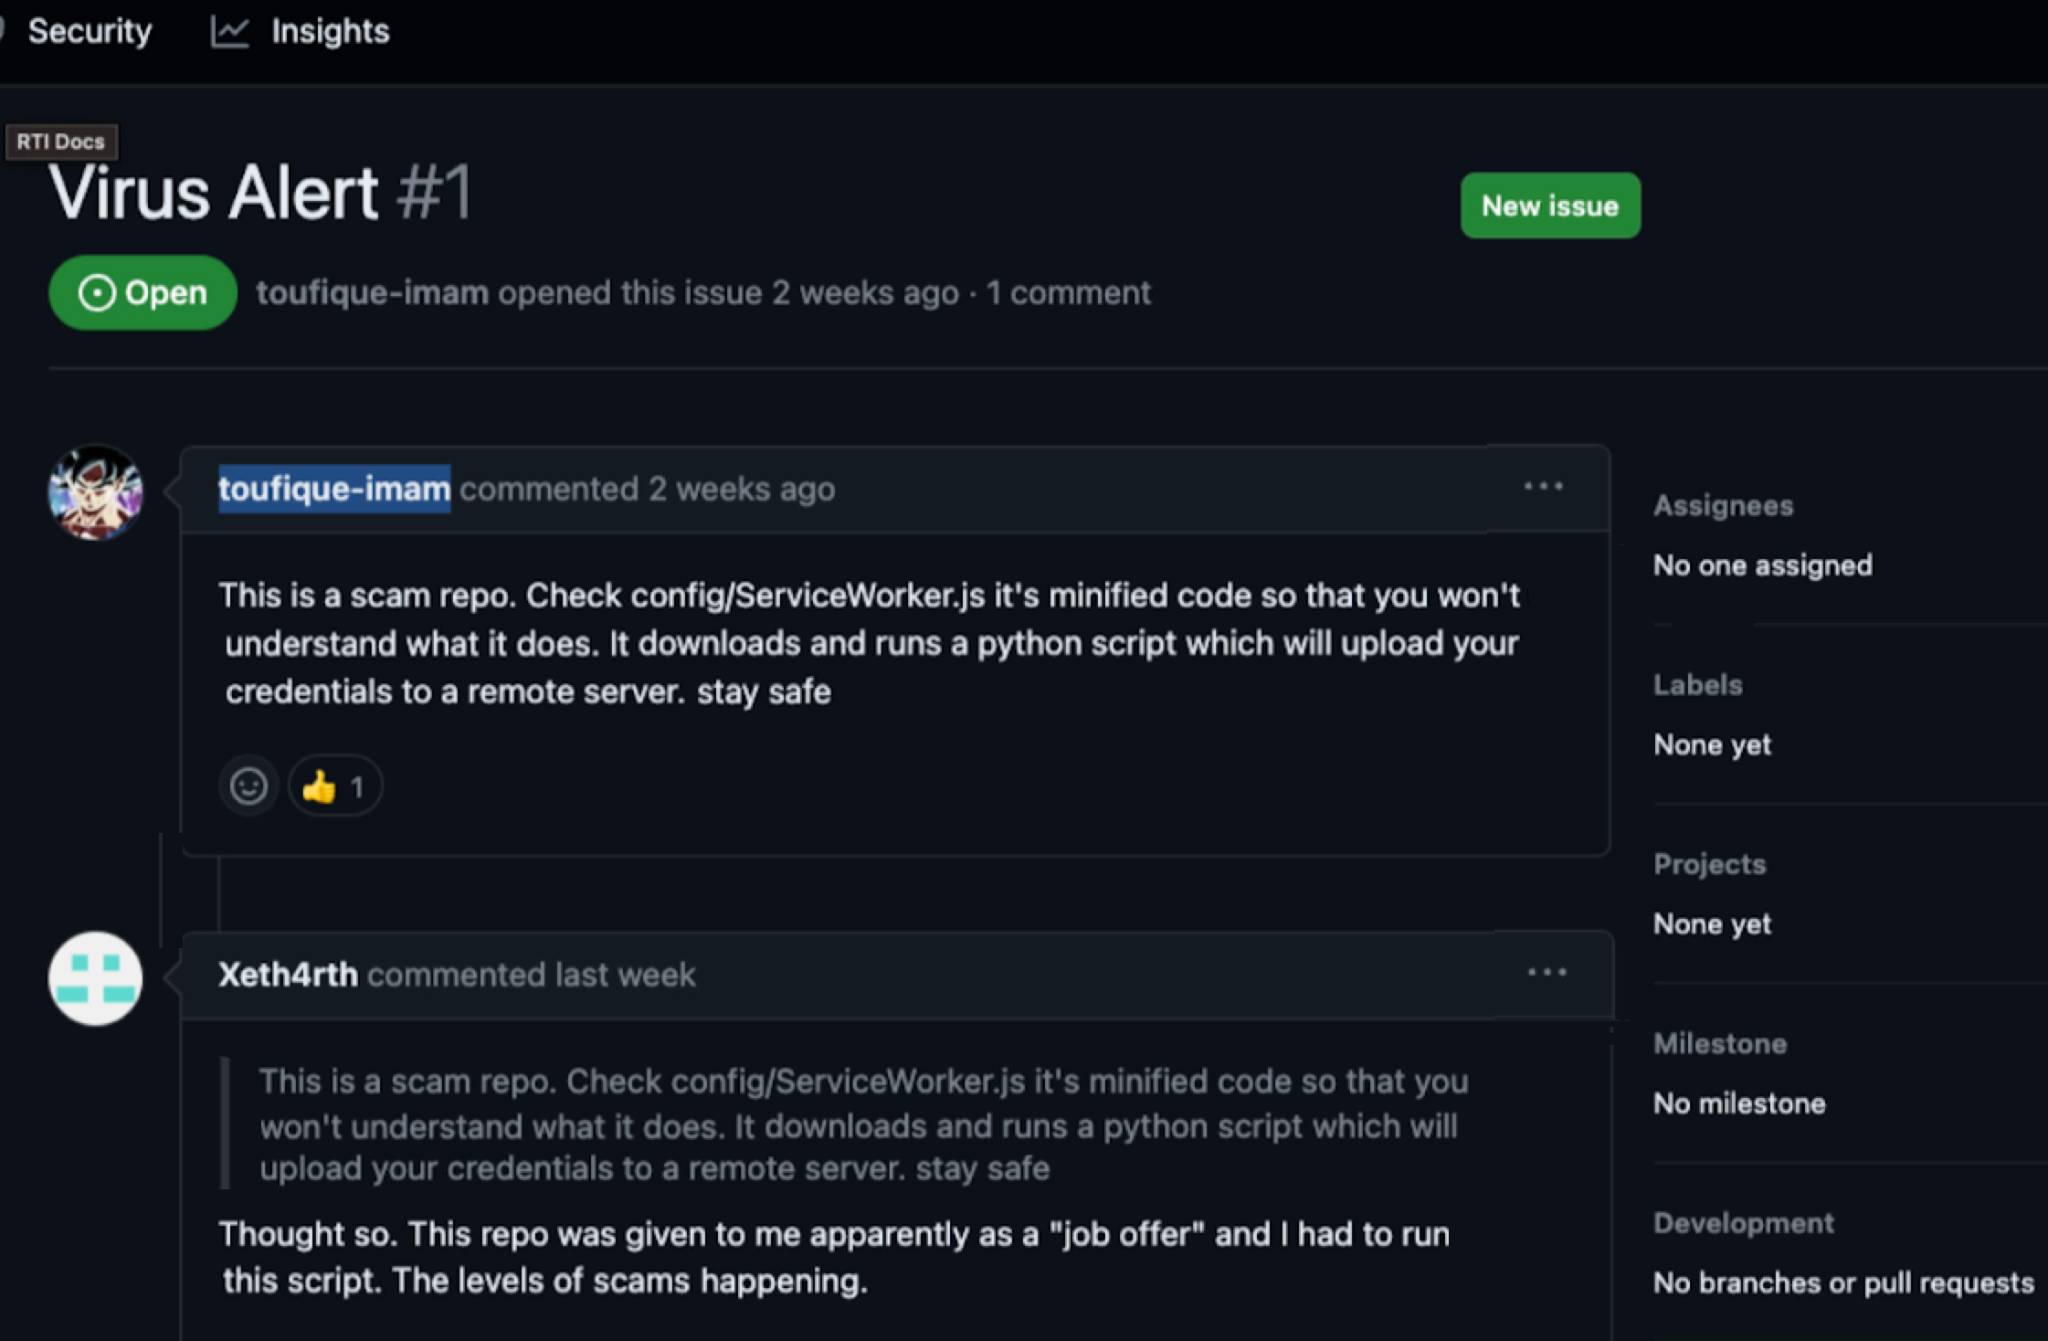 Image 3 is a screenshot of a GitHub user comment page for Virus Alert #1. Toufique-imam comments that the repo is a scam and cautions other users to stay safe. A reply to their comment by Xeth4rth says that the repo was given to them as a job offer and also declares it a scam. 